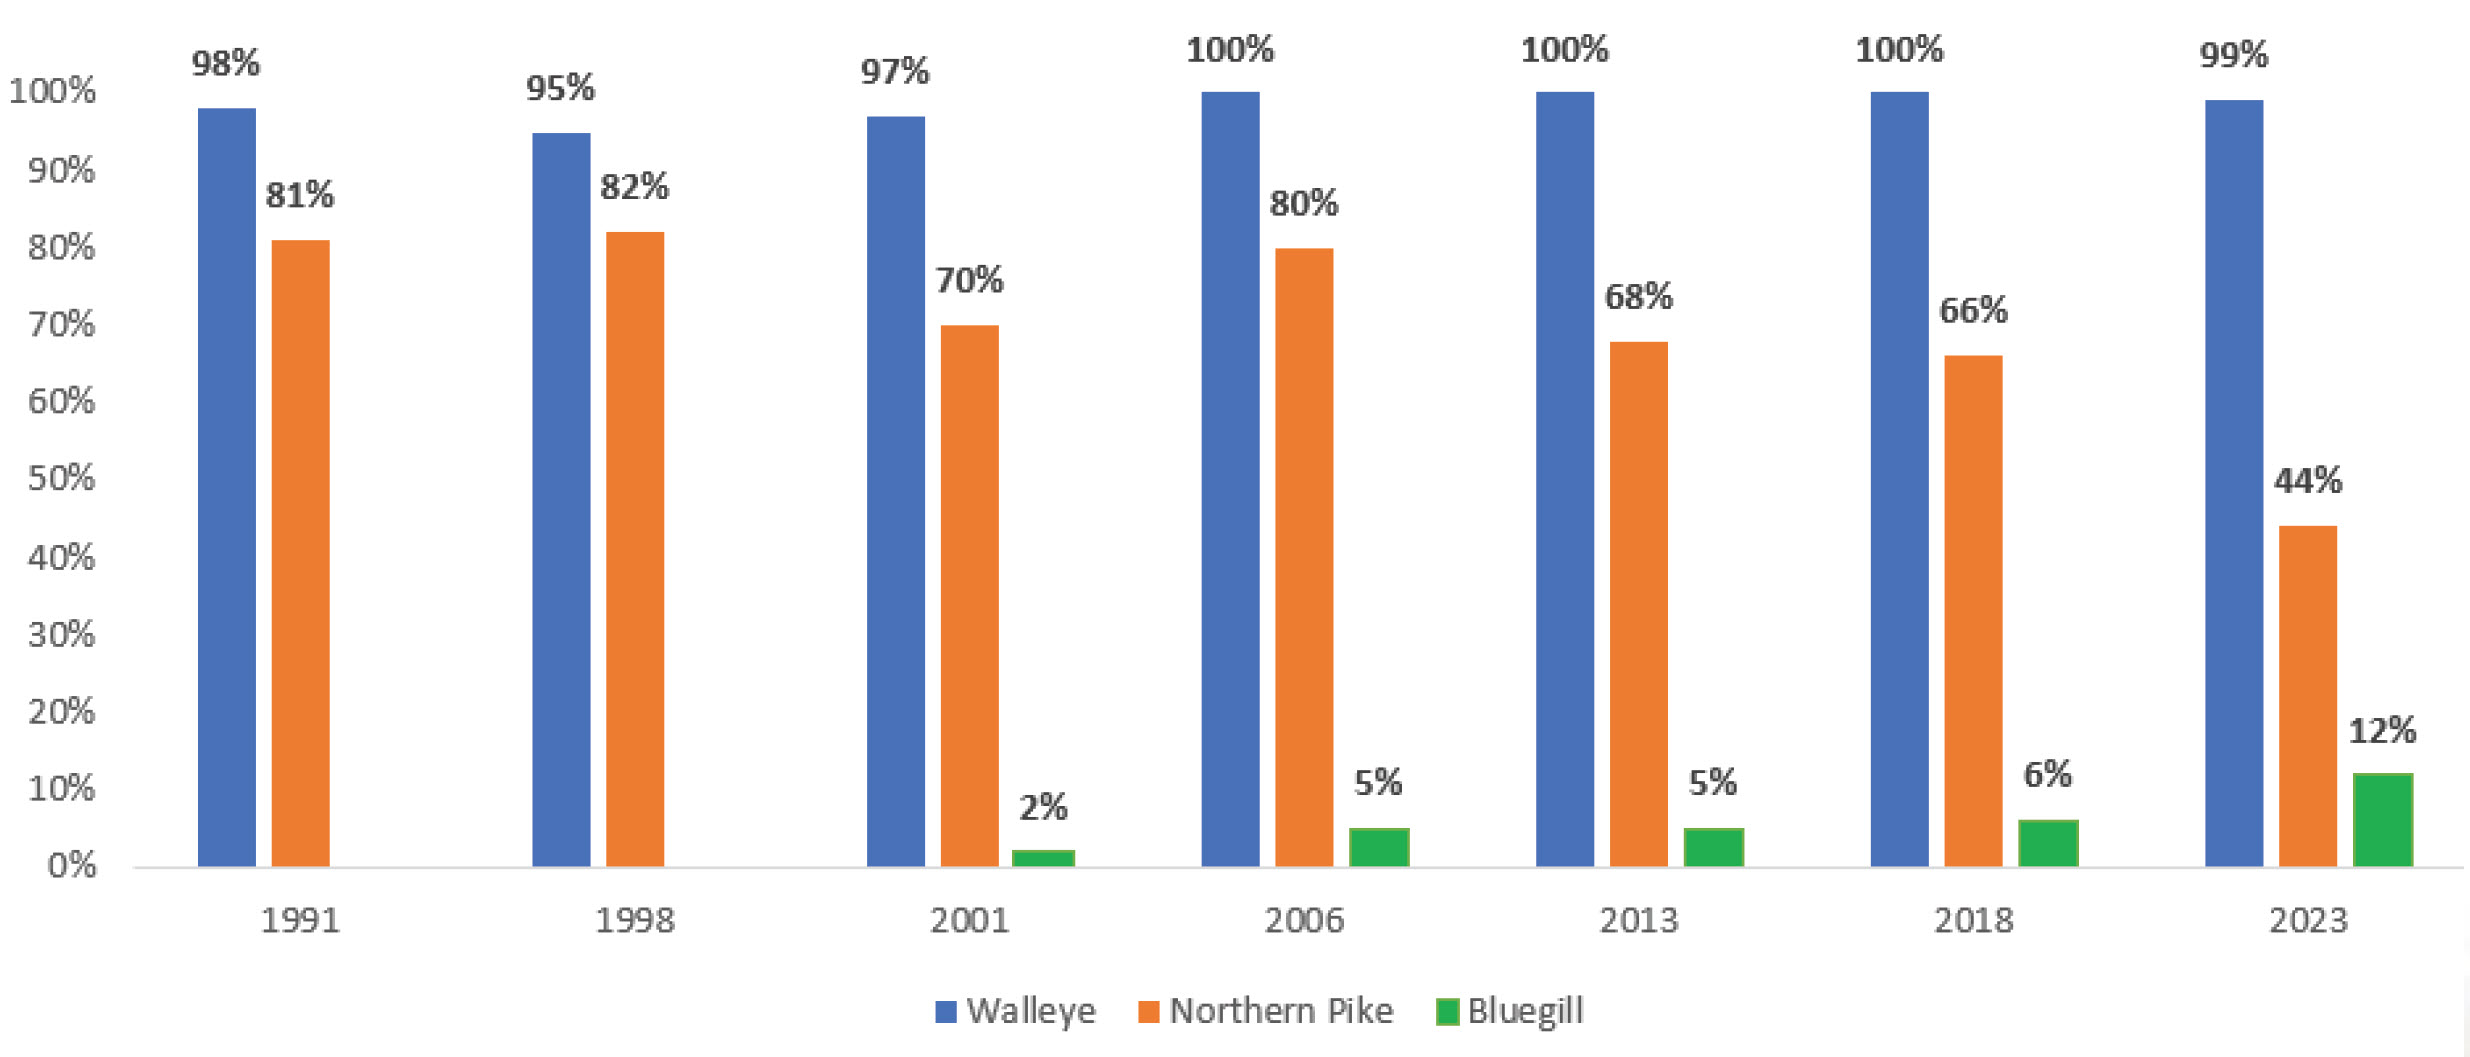 Chart showing walleye being the preferred species over the years with northern pike second and bluegill third